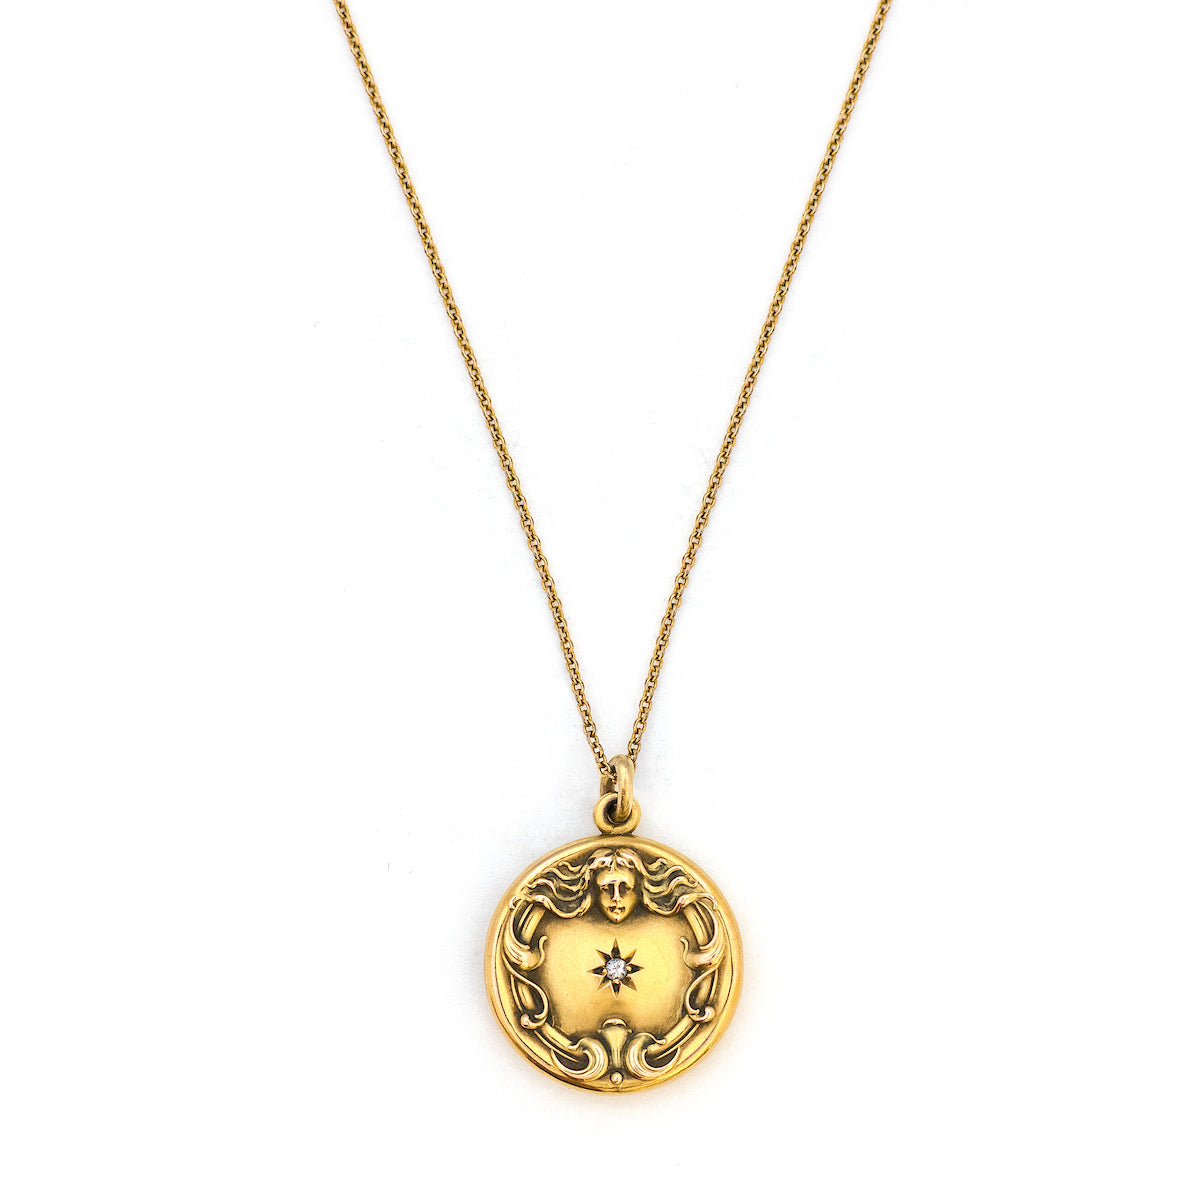 Buy Gold Plated Heart Shaped Photo Locket Pendant Necklace by Zariin Online  at Aza Fashions.